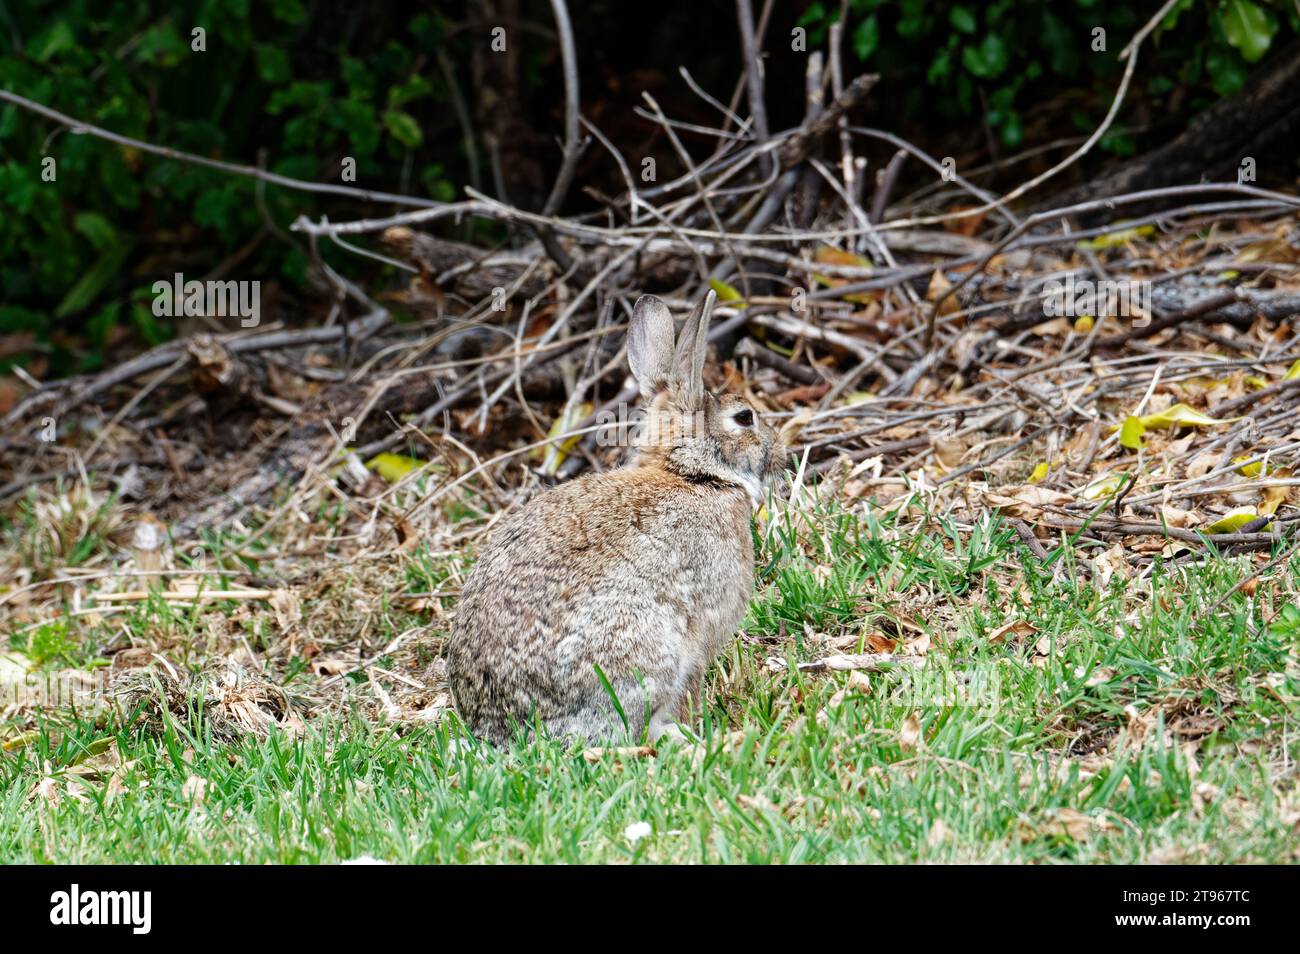 An alert young rabbit looks like it is about to hop away Stock Photo